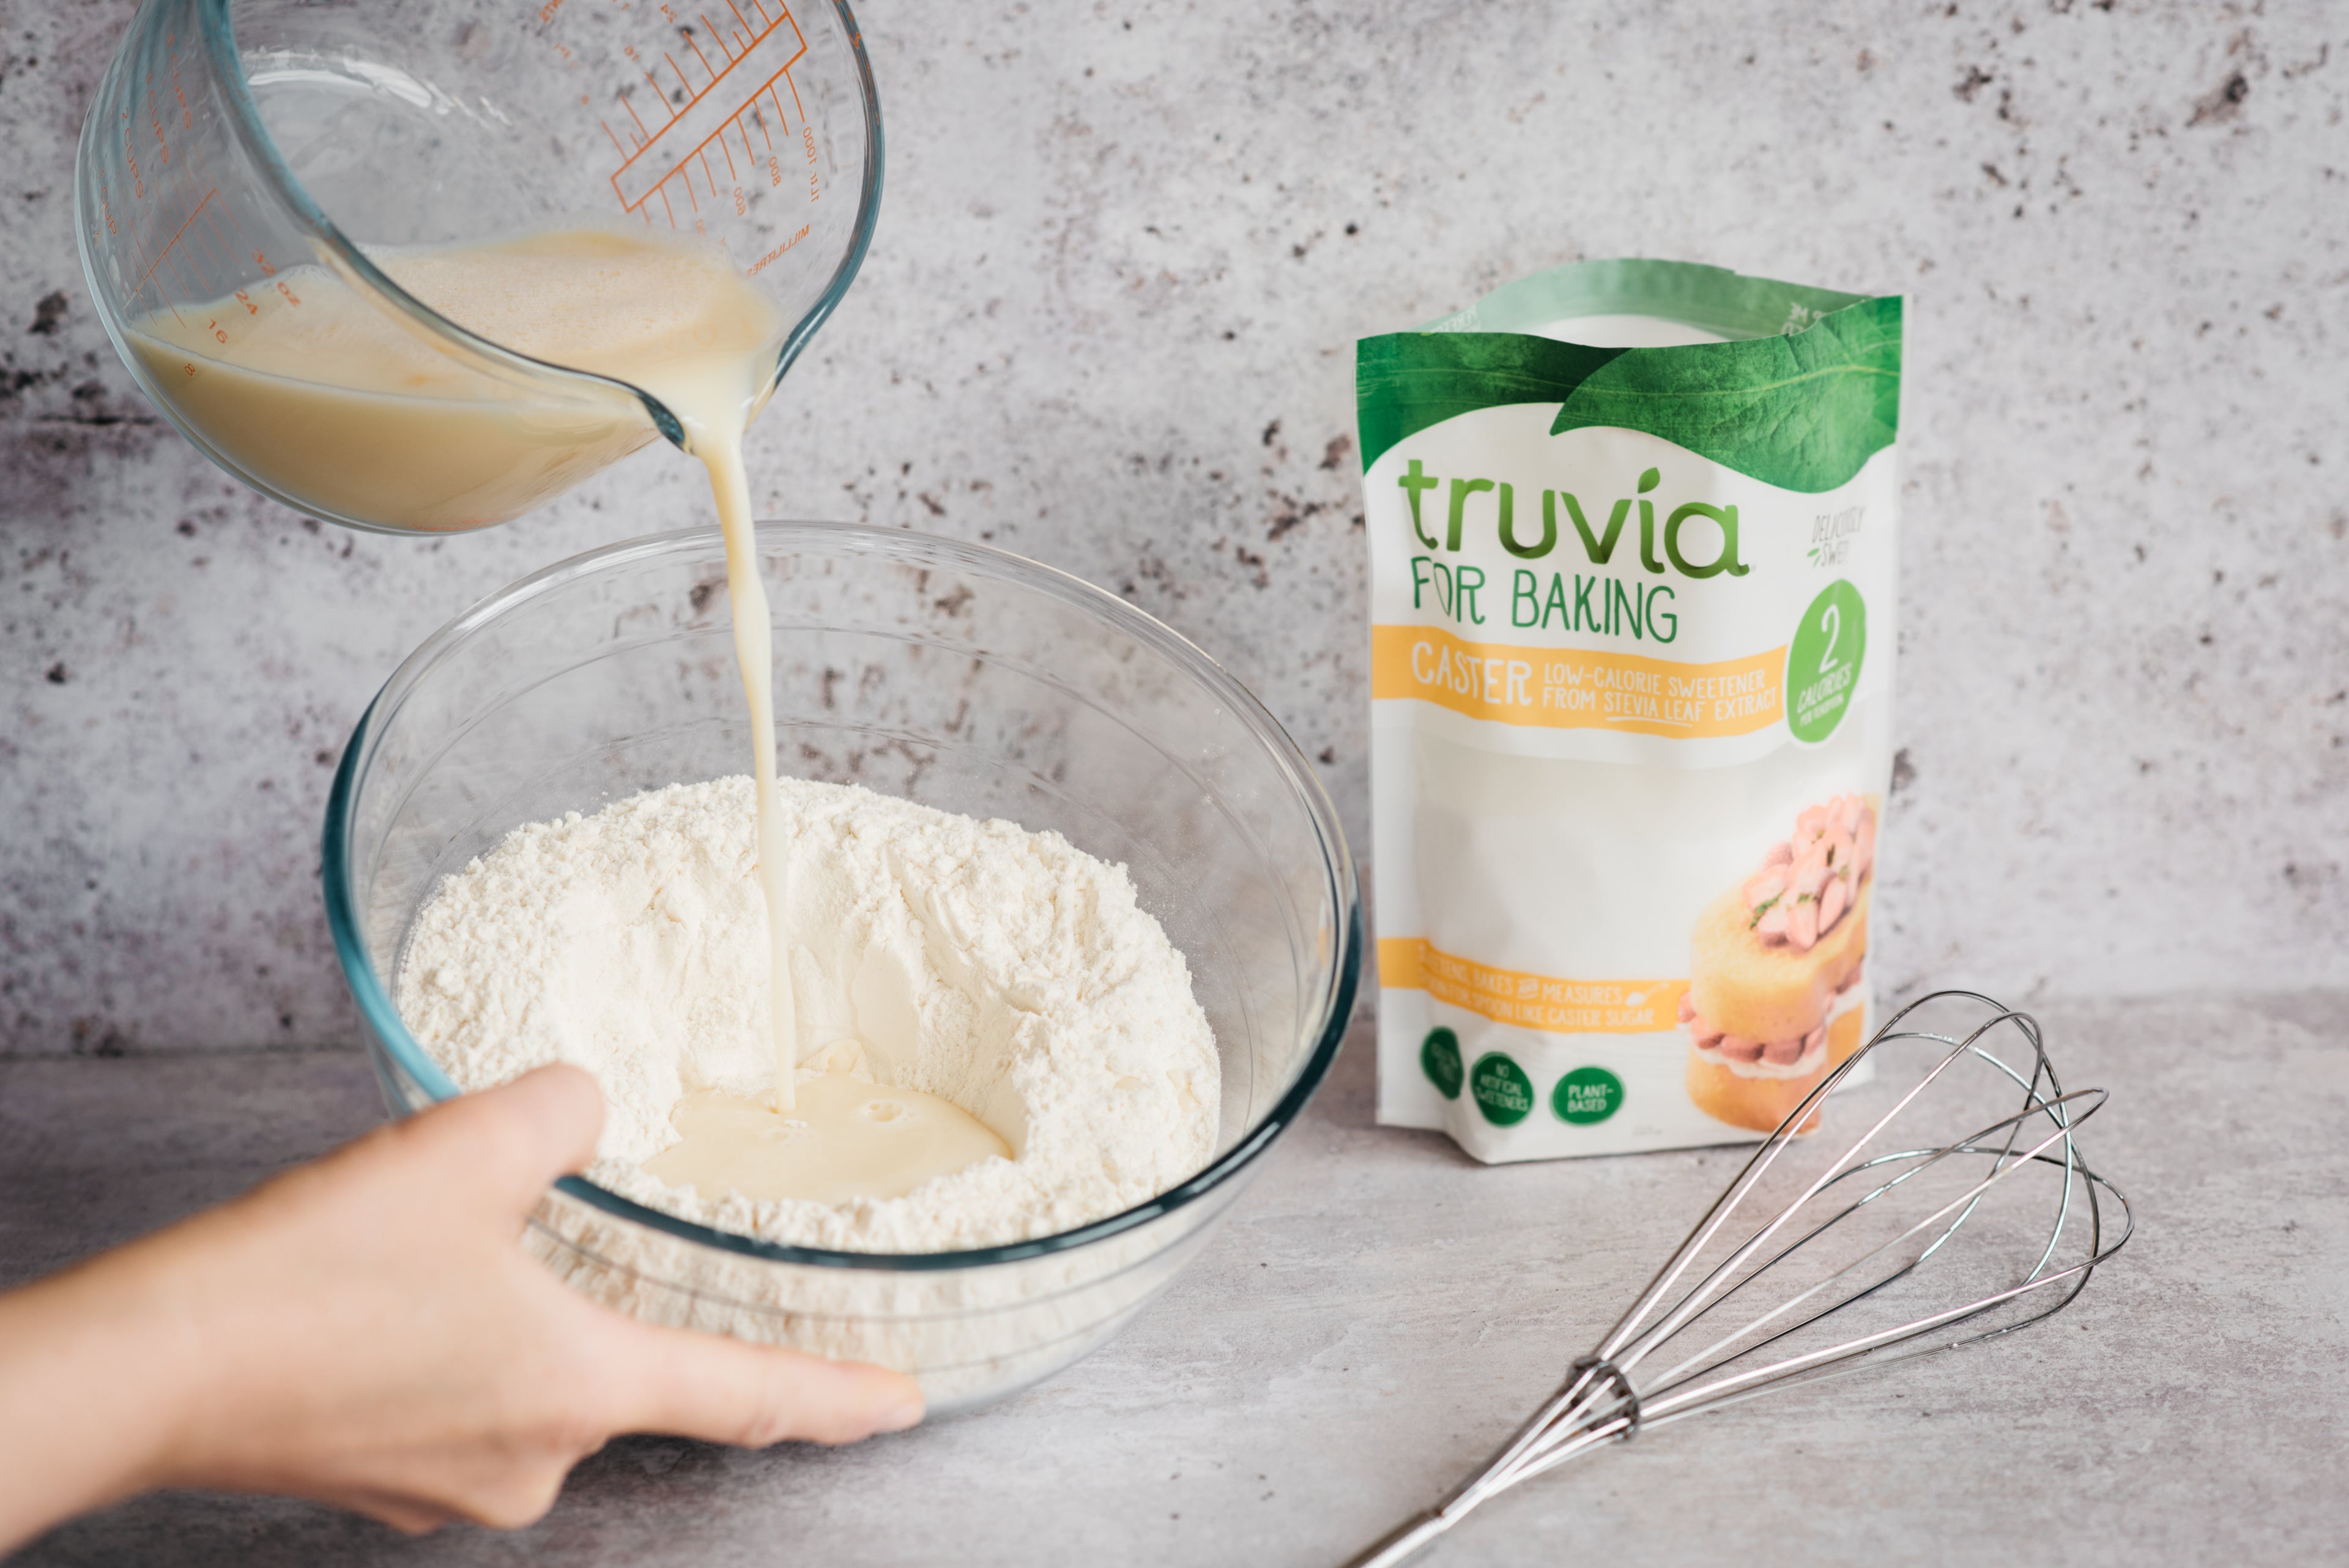 Wet ingredients being poured into dry, with a pack of Truvia for Baking Caster next to the bowl